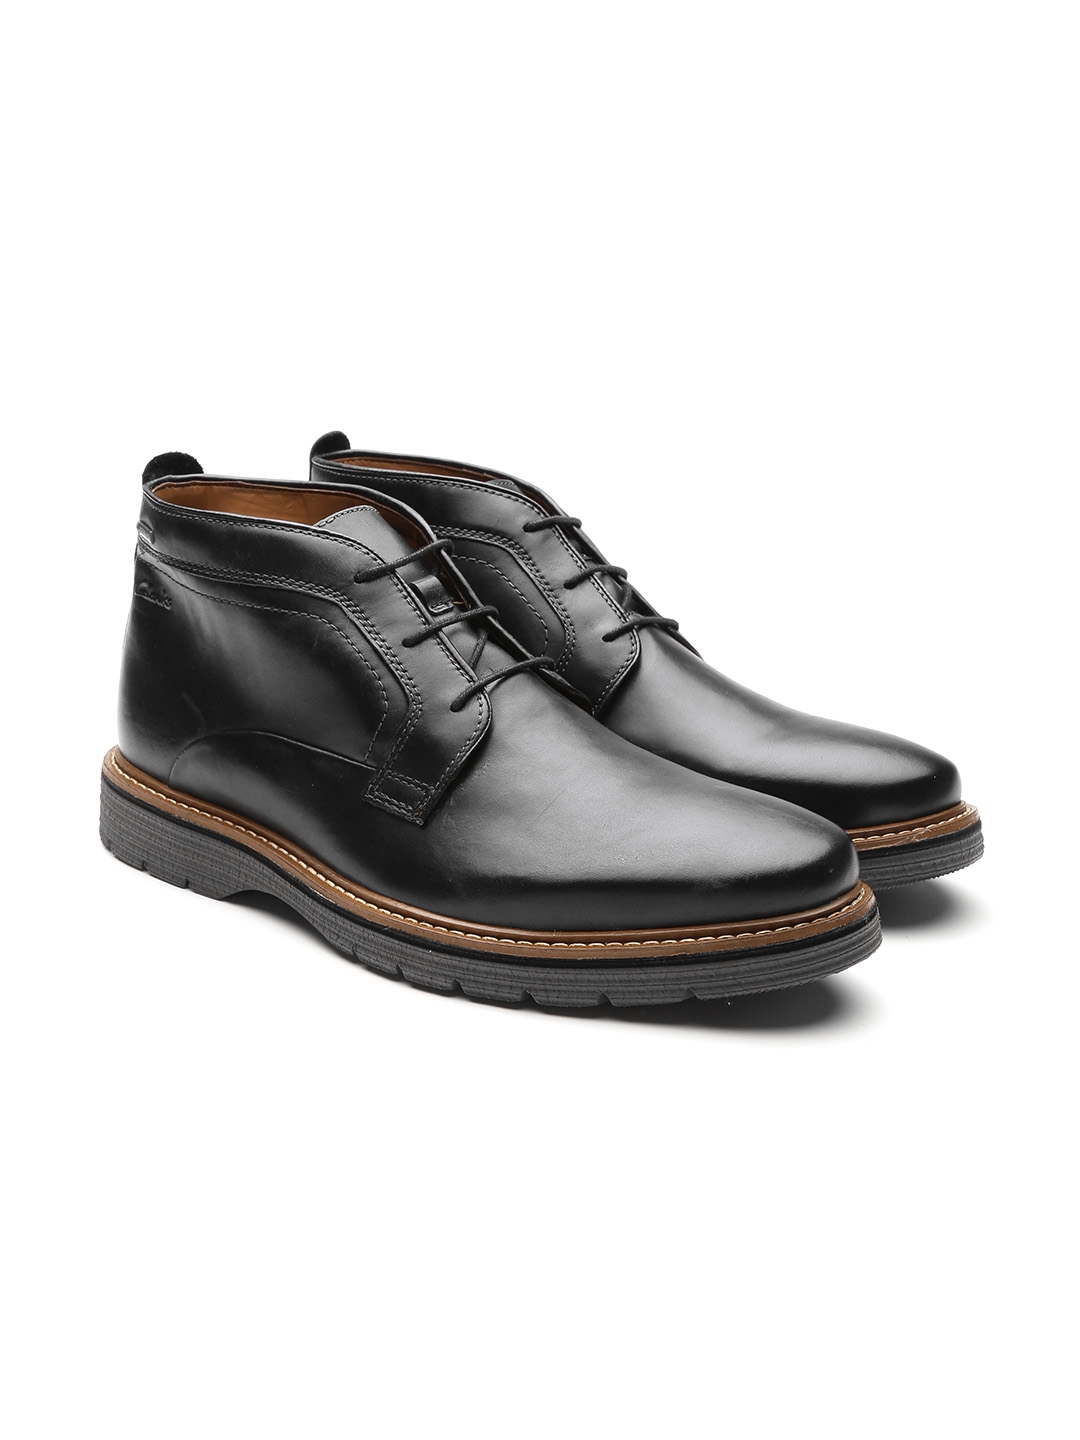 Buy Clarks Men Black Leather Flat Boots - Boots for Men 2116256 | Myntra